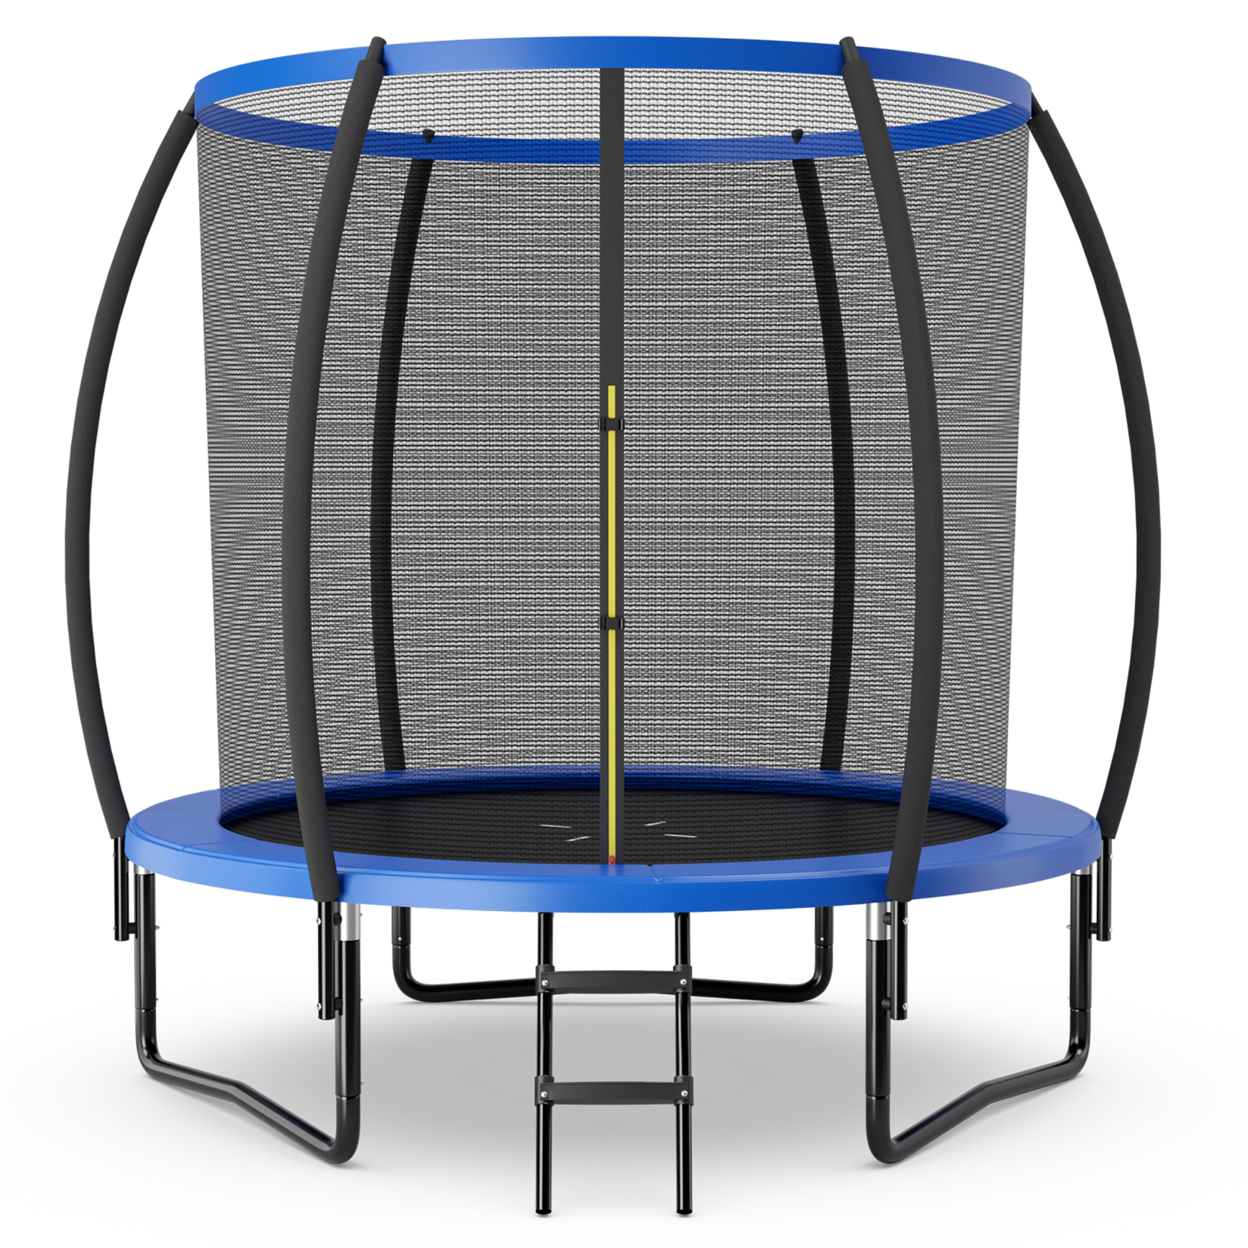 12FT Recreational Trampoline W/ Ladder Enclosure Net Safety Pad Outdoor - Blue